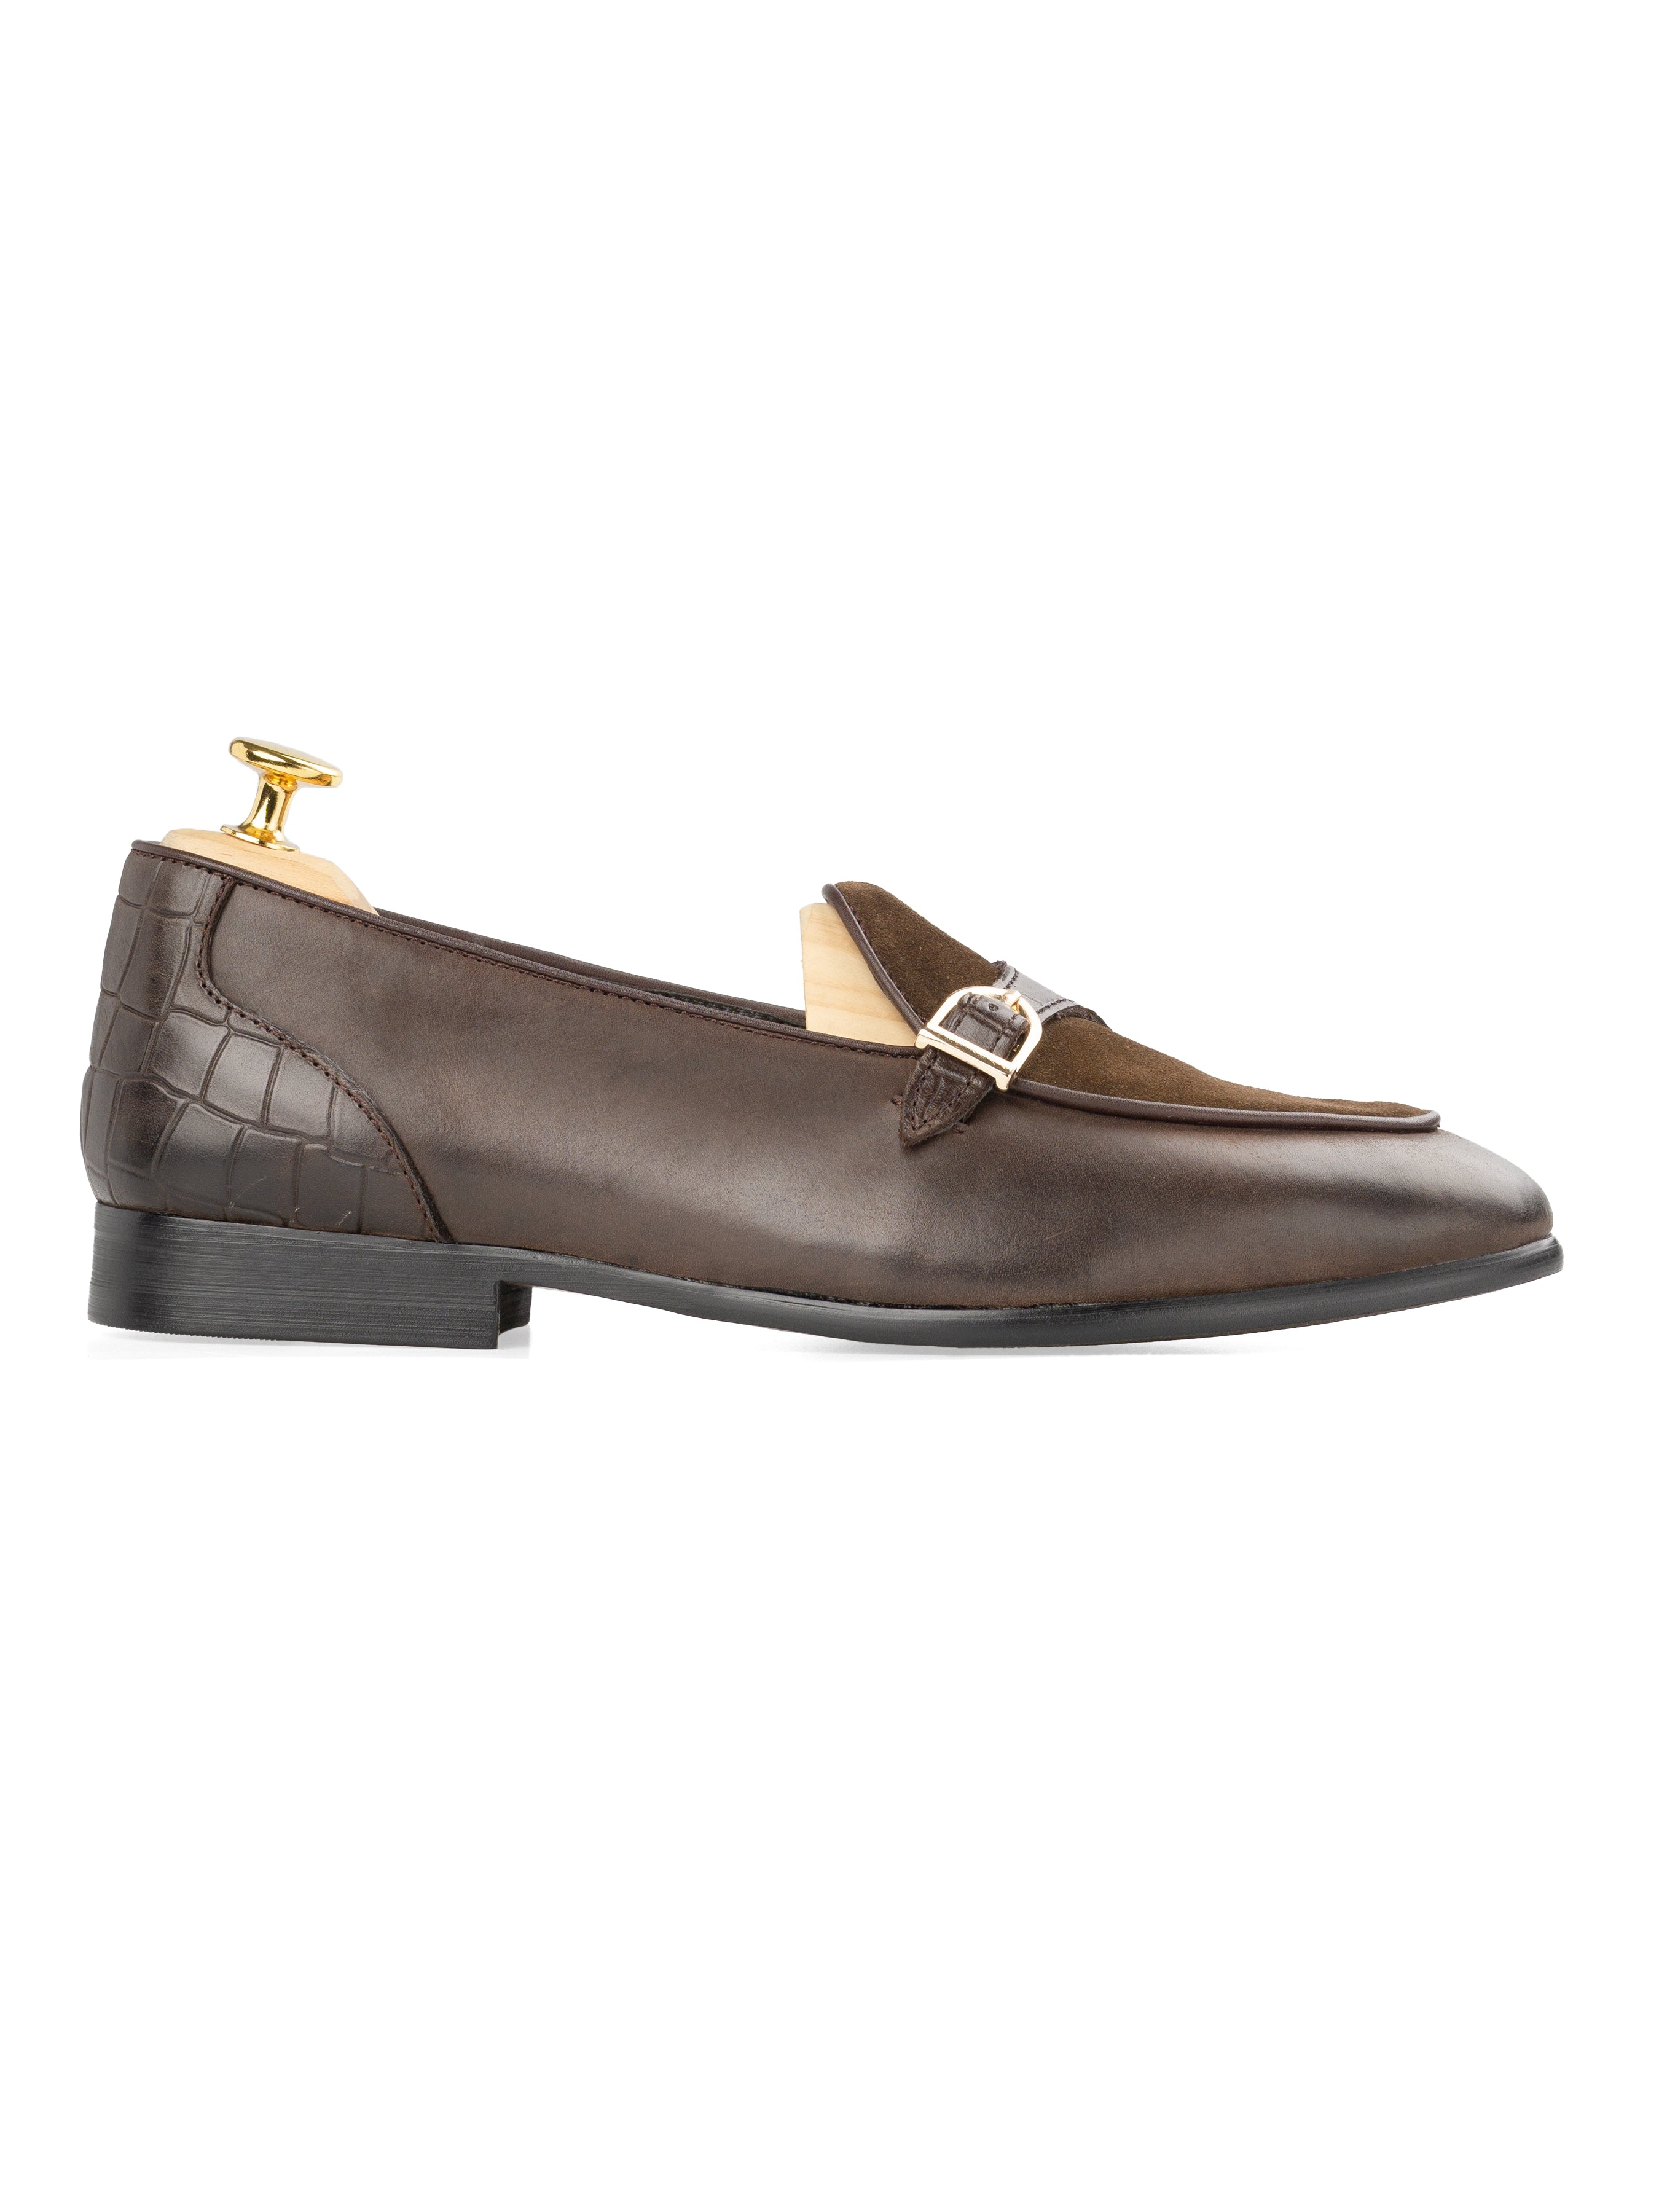 Theo Belgian Suede Loafer - Coffee Single Strap Croco